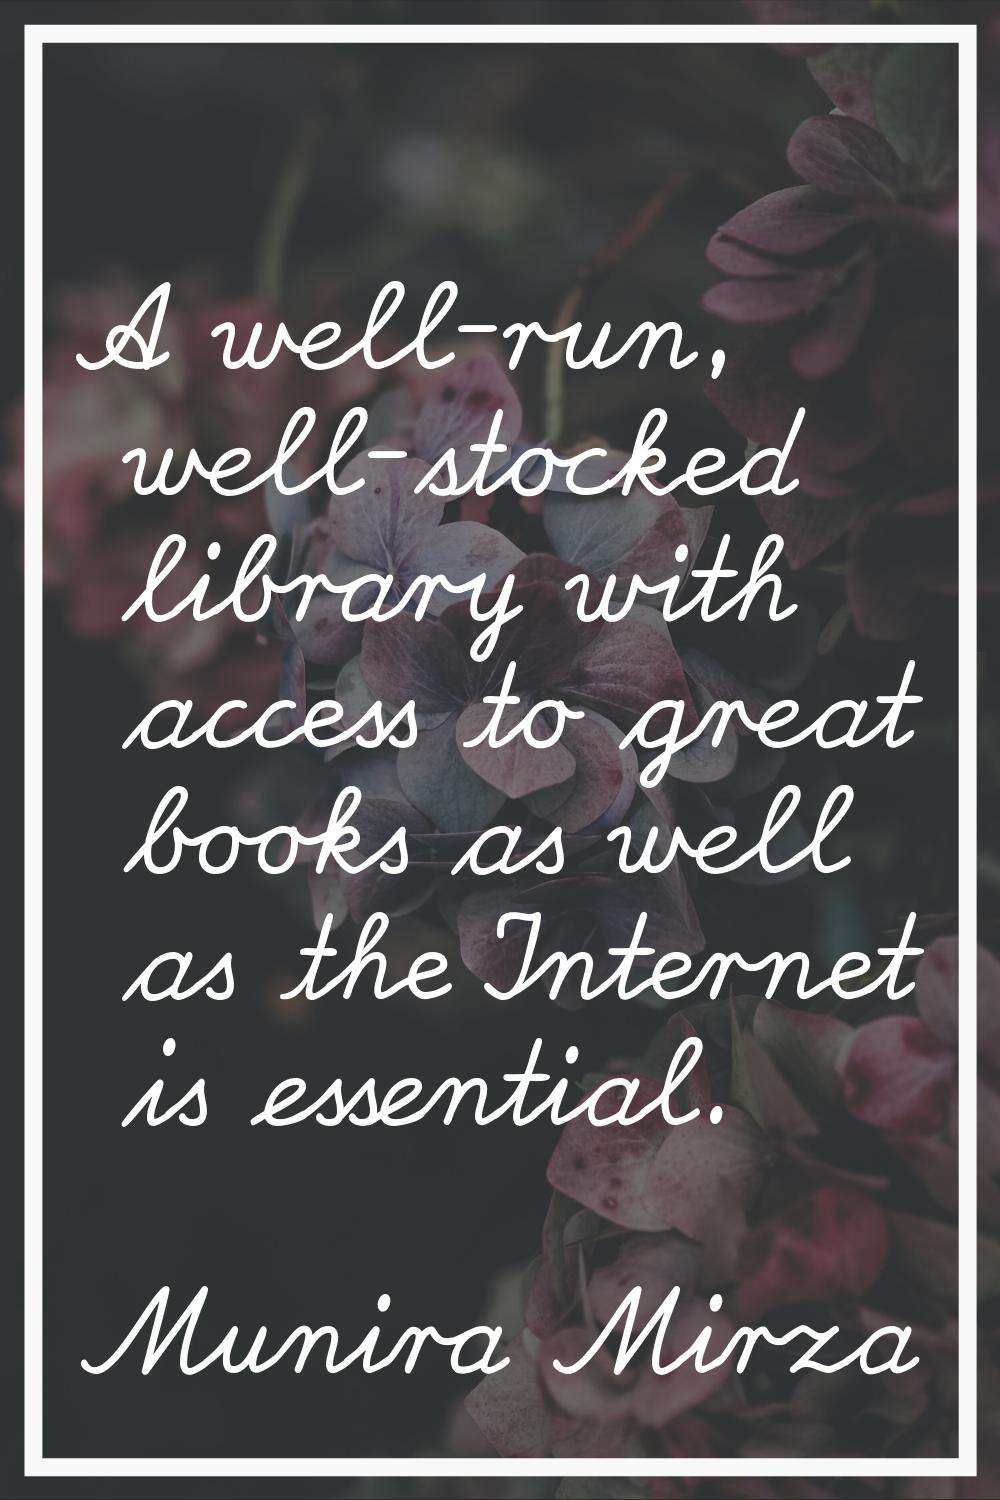 A well-run, well-stocked library with access to great books as well as the Internet is essential.